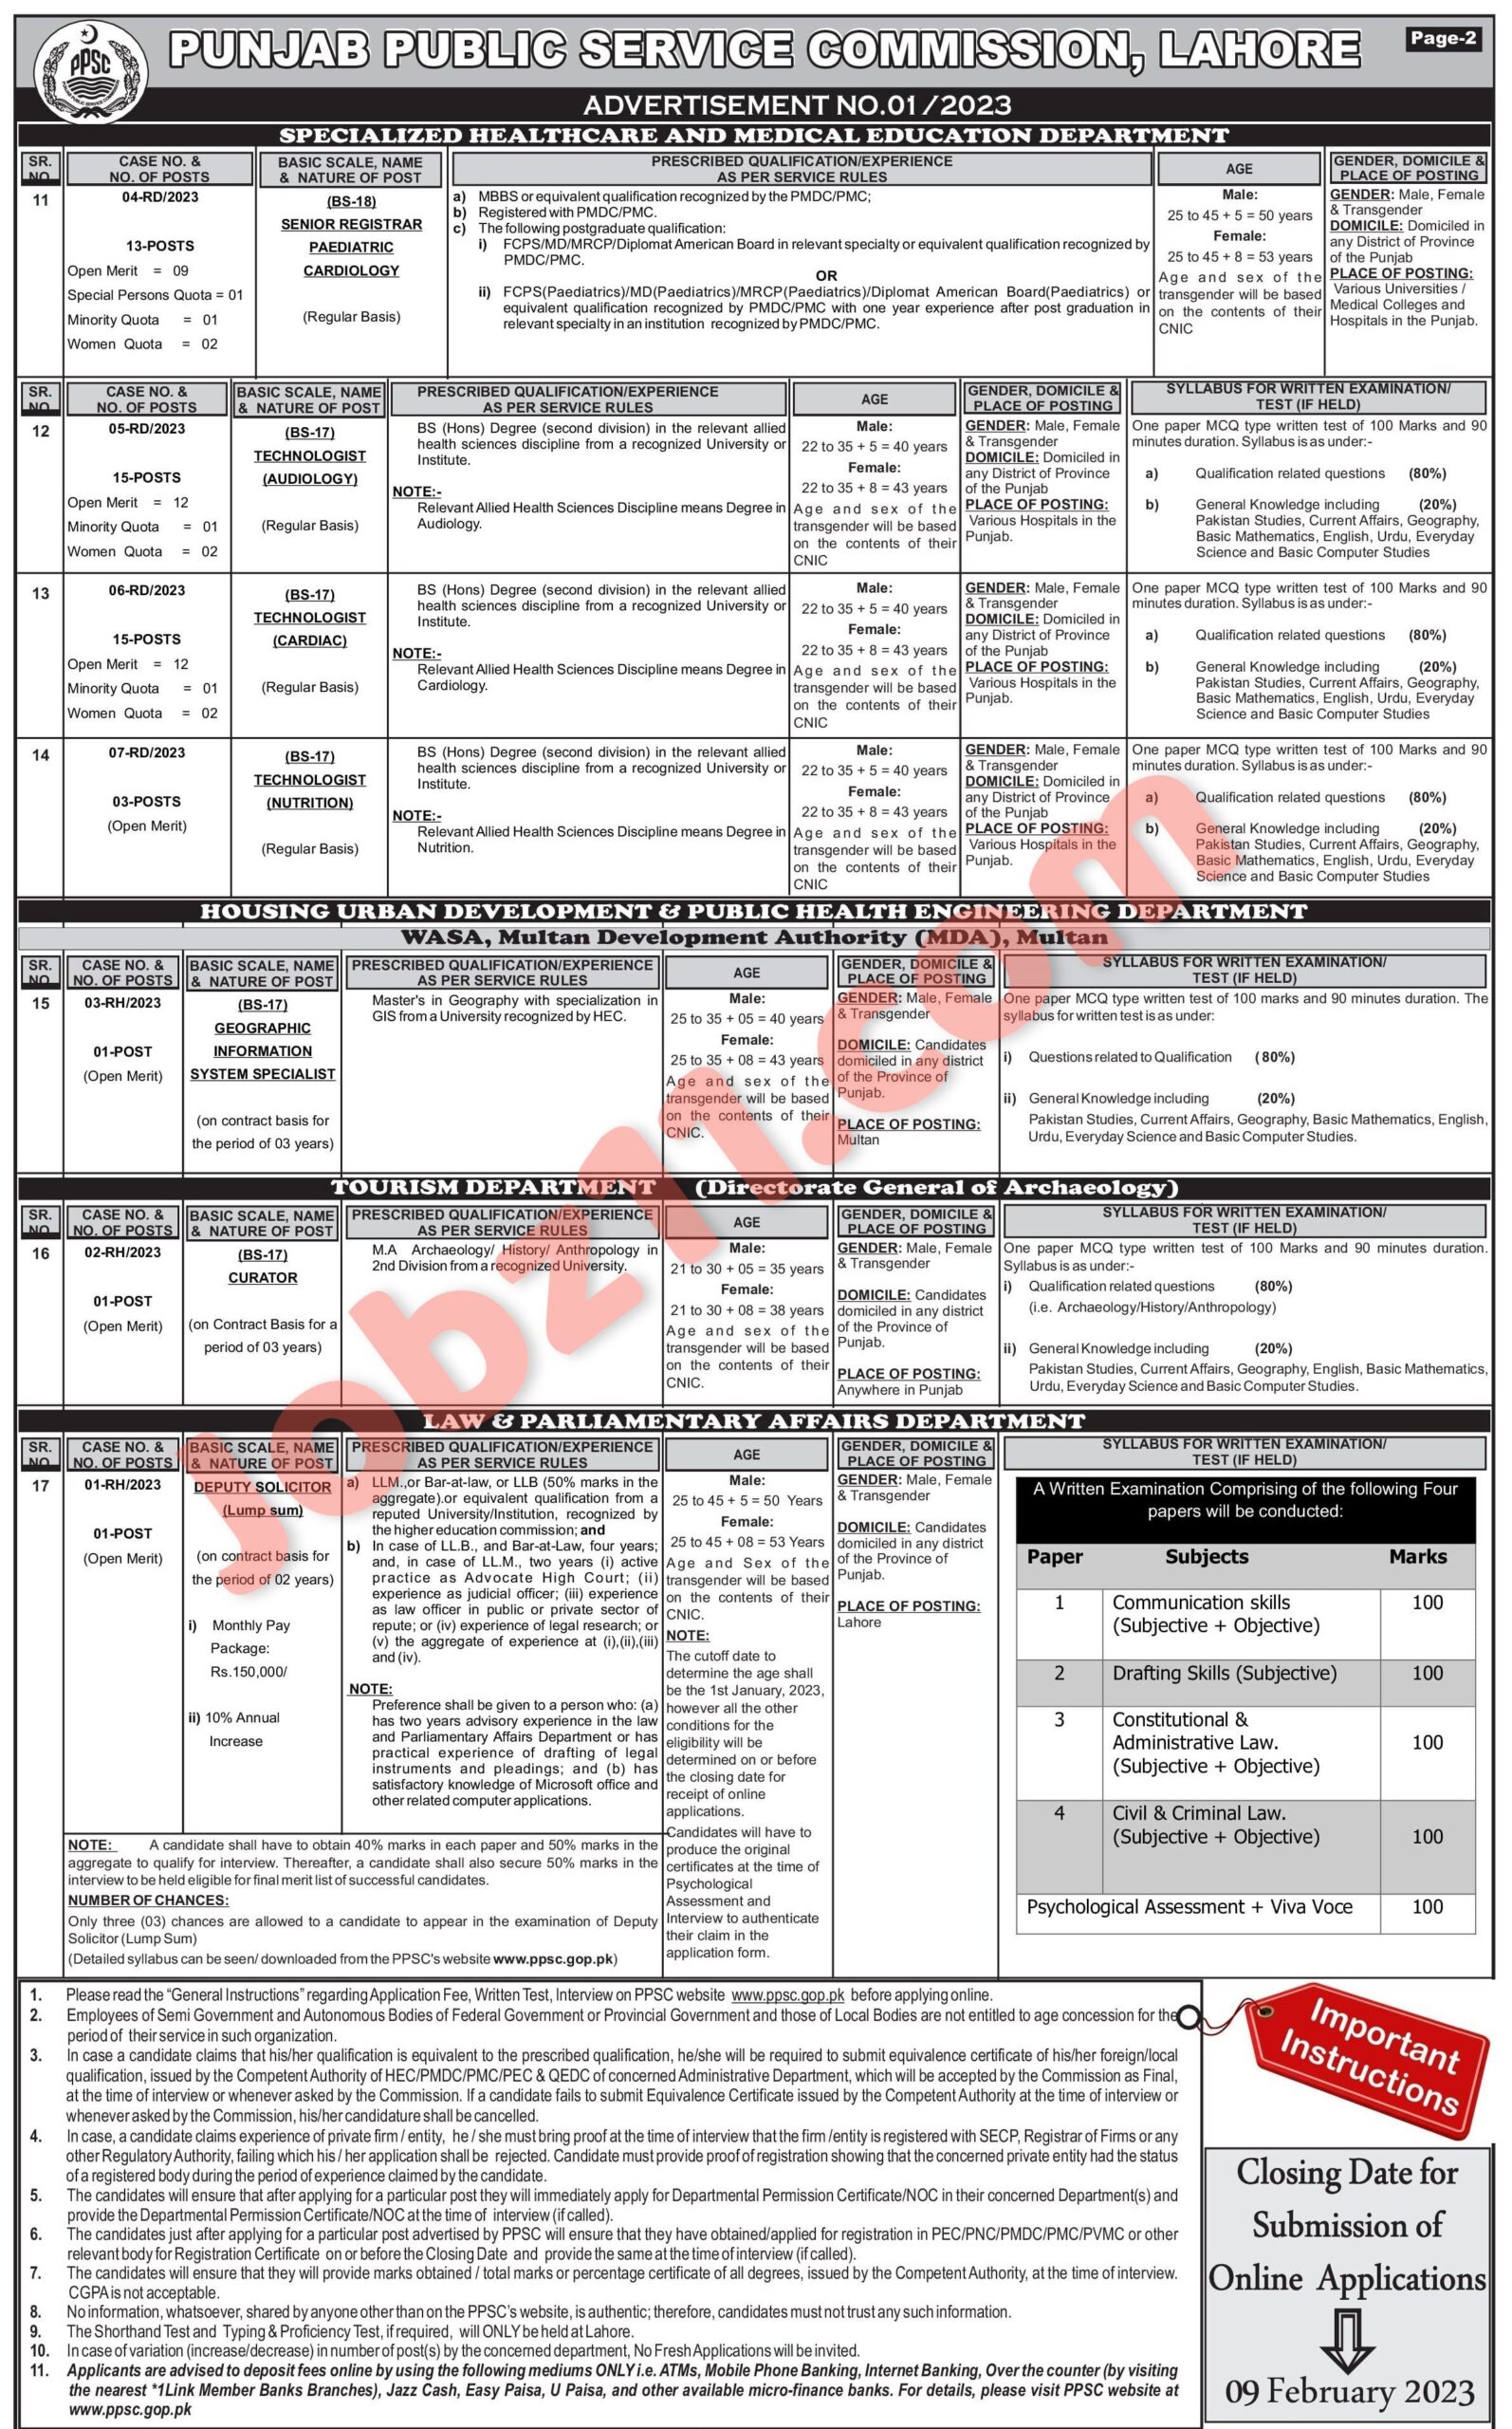 PPSC Jobs 2023 for Govt of Punjab Ad 01 2023